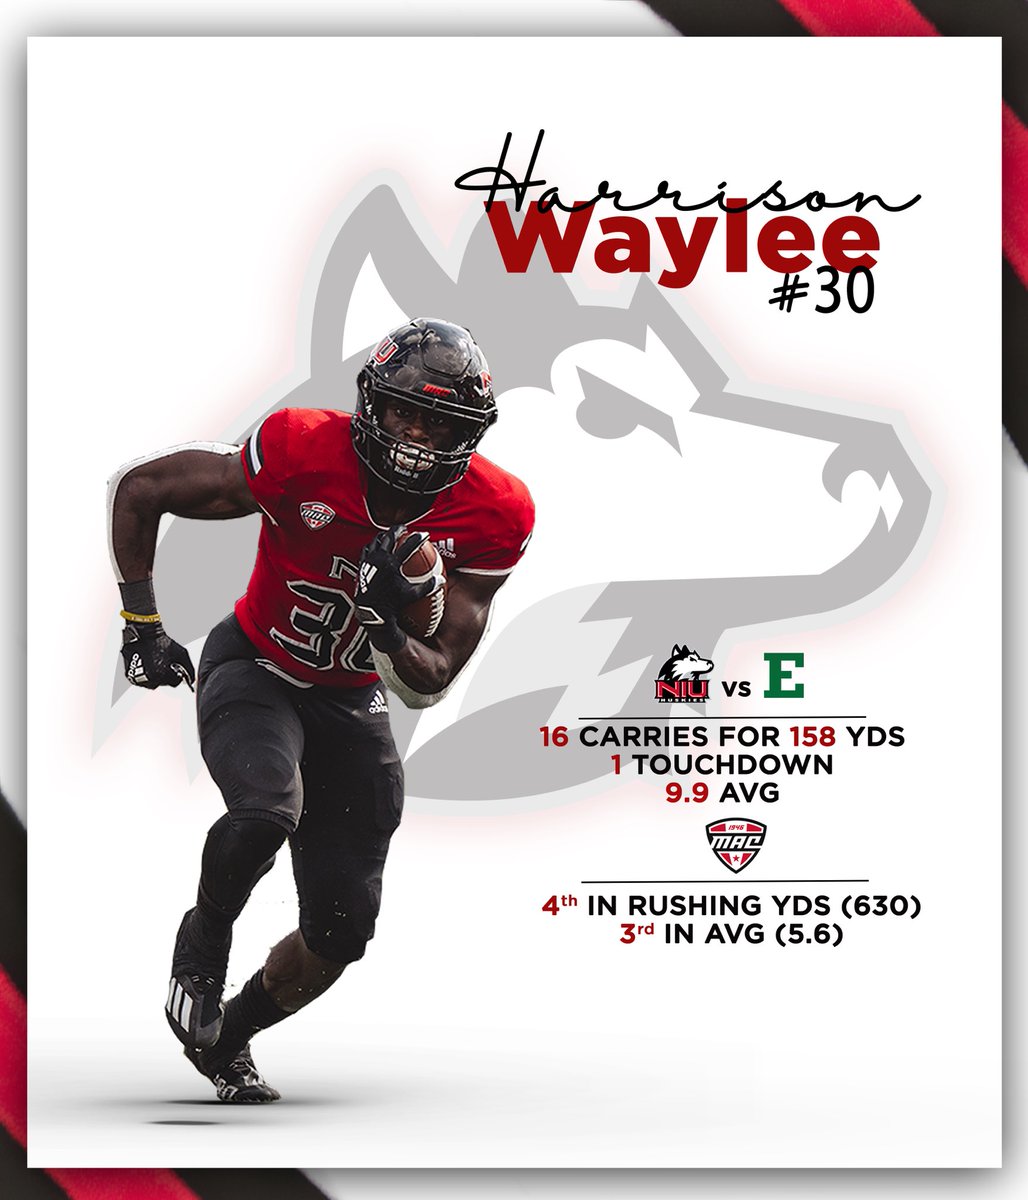 There he goes again. 👀@hwaylee02 #TheClimb 🧗🏽| #TheHardWay